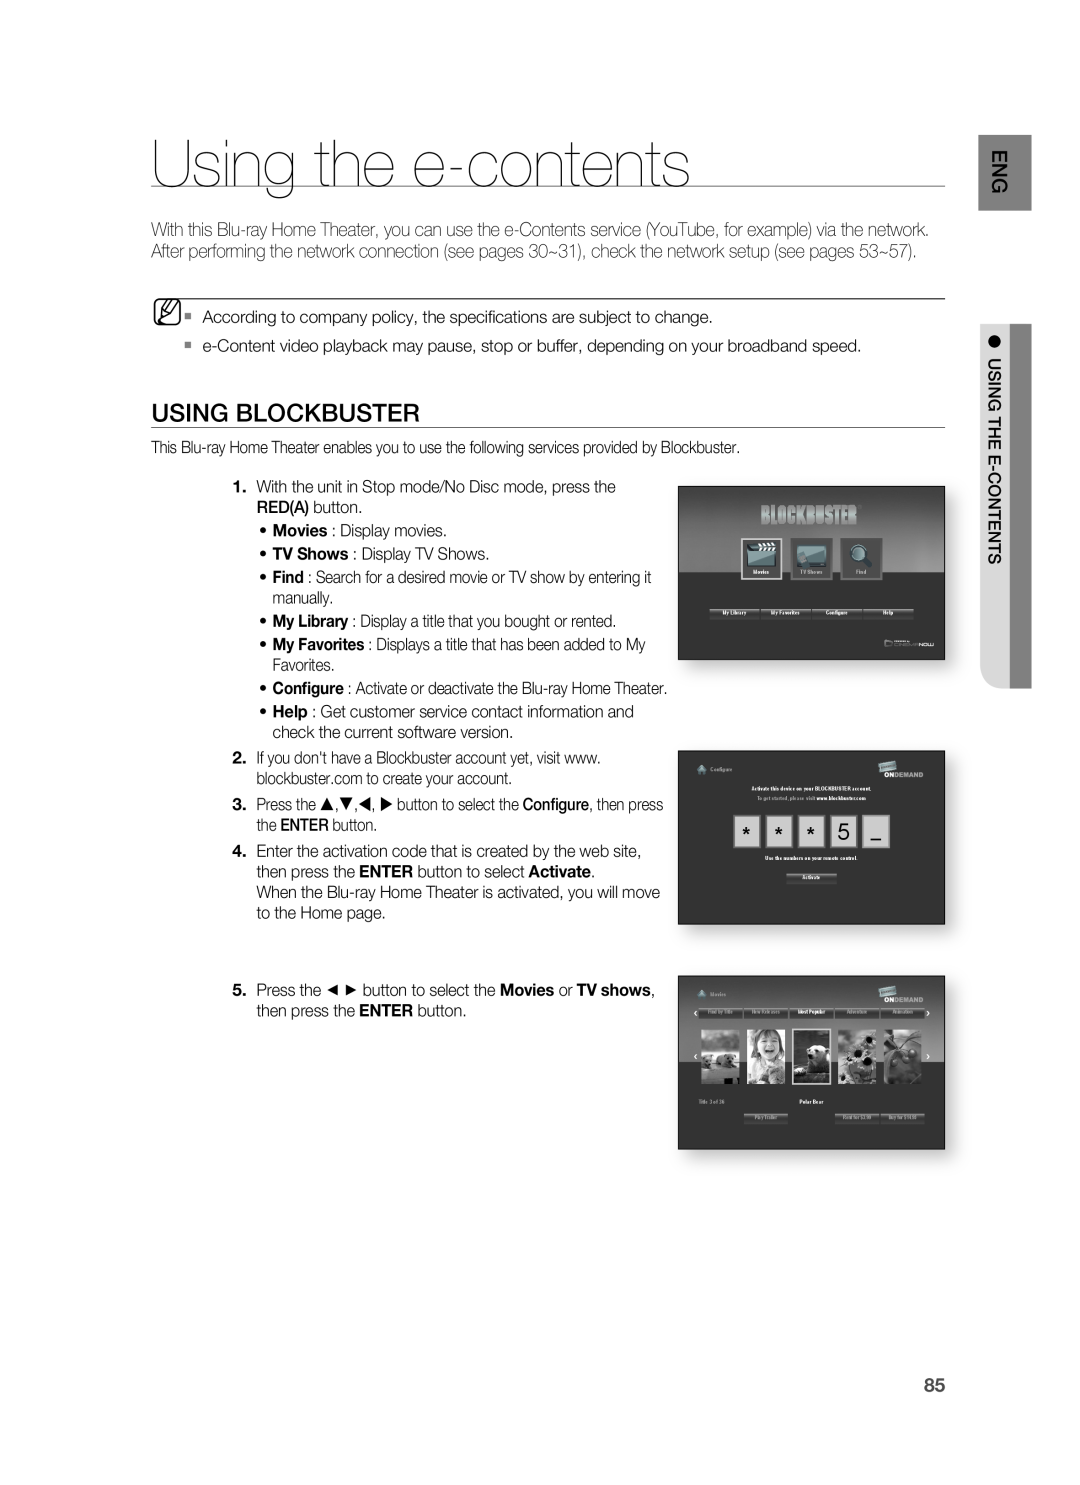 Samsung HT-BD3252A, AH68-02231A user manual Using the e-contents, Using Blockbuster, • TV Shows : Display TV Shows, manually 